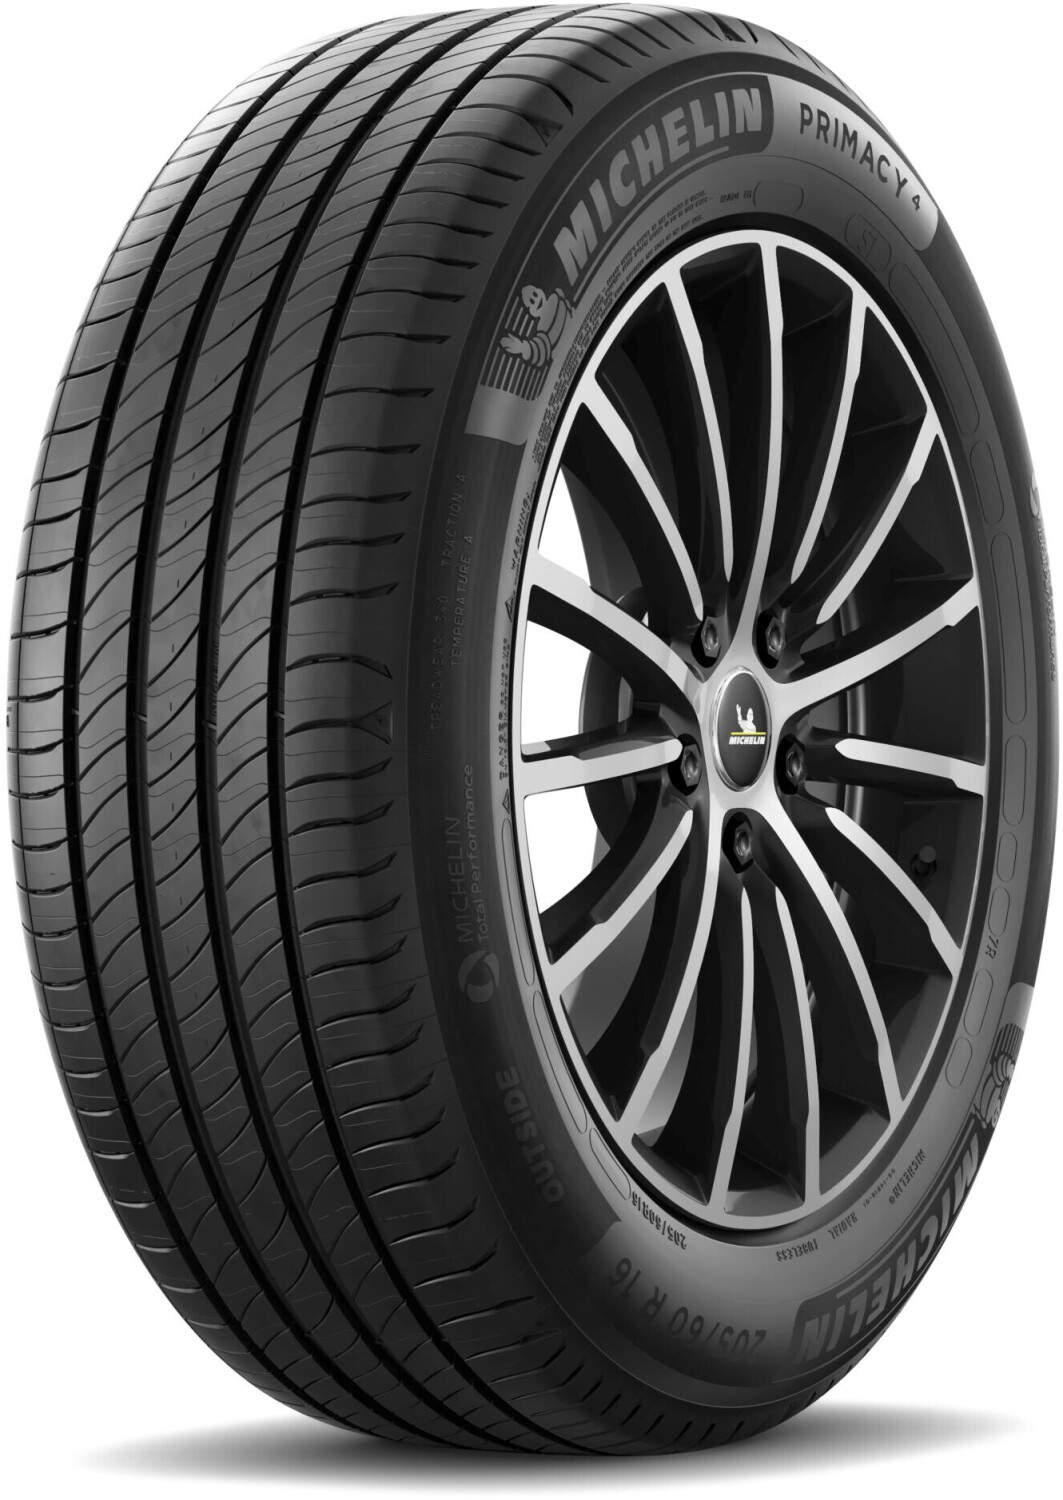 Buy Michelin Primacy 4 S1 205/60 R16 92H from £95.18 (Today) Best